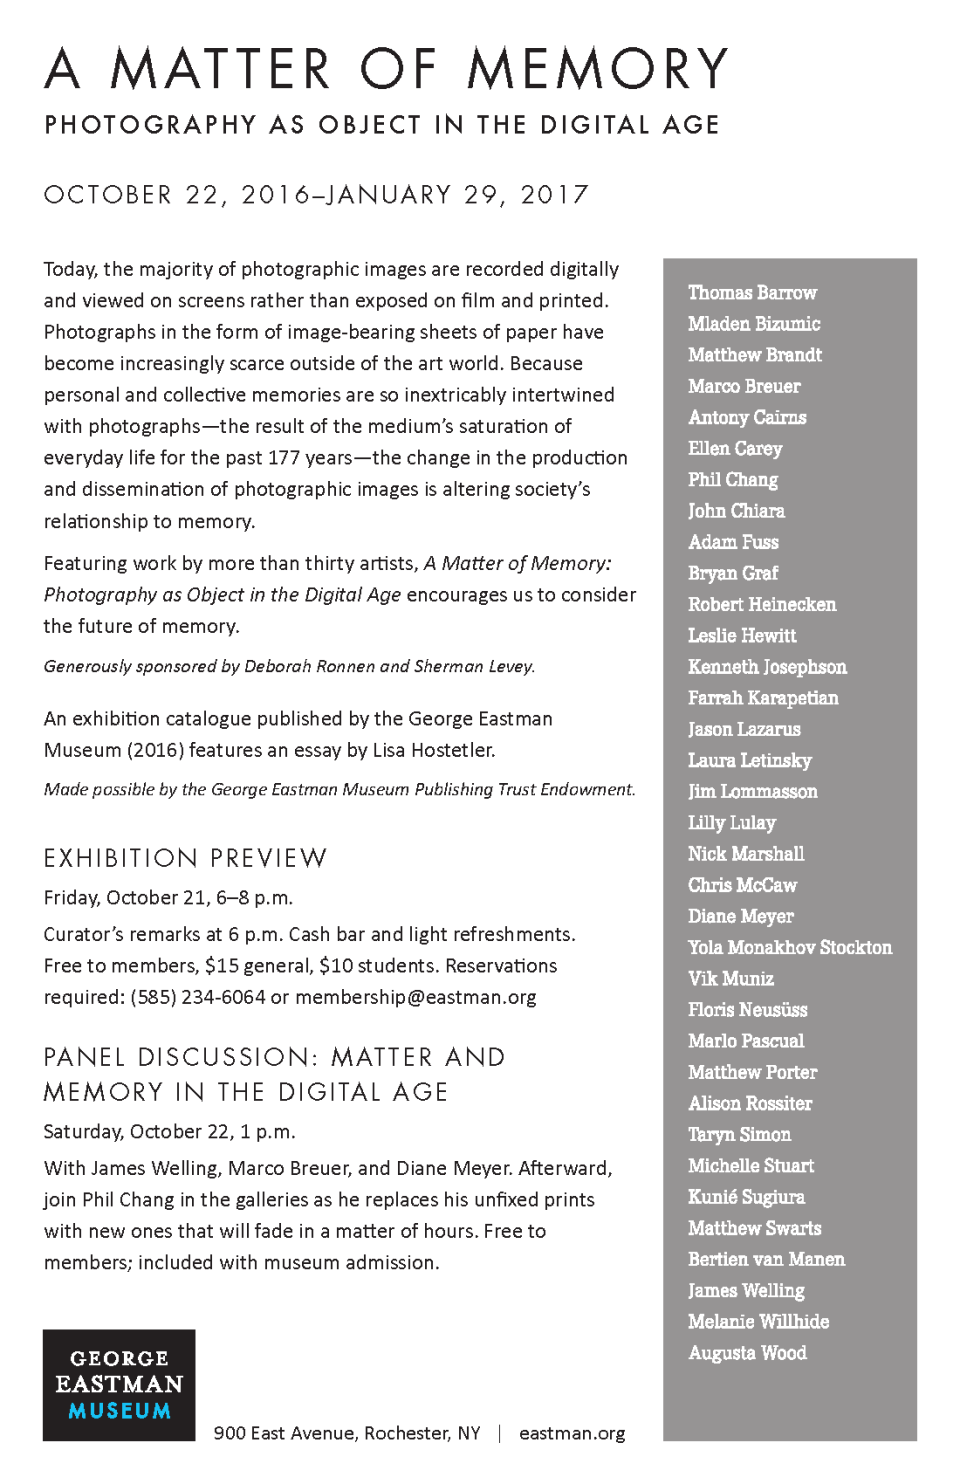 MATTHEW SWARTS A Matter of Memory at the George Eastman Museum to open October 22, 2016 gem matterofmemory e flyer